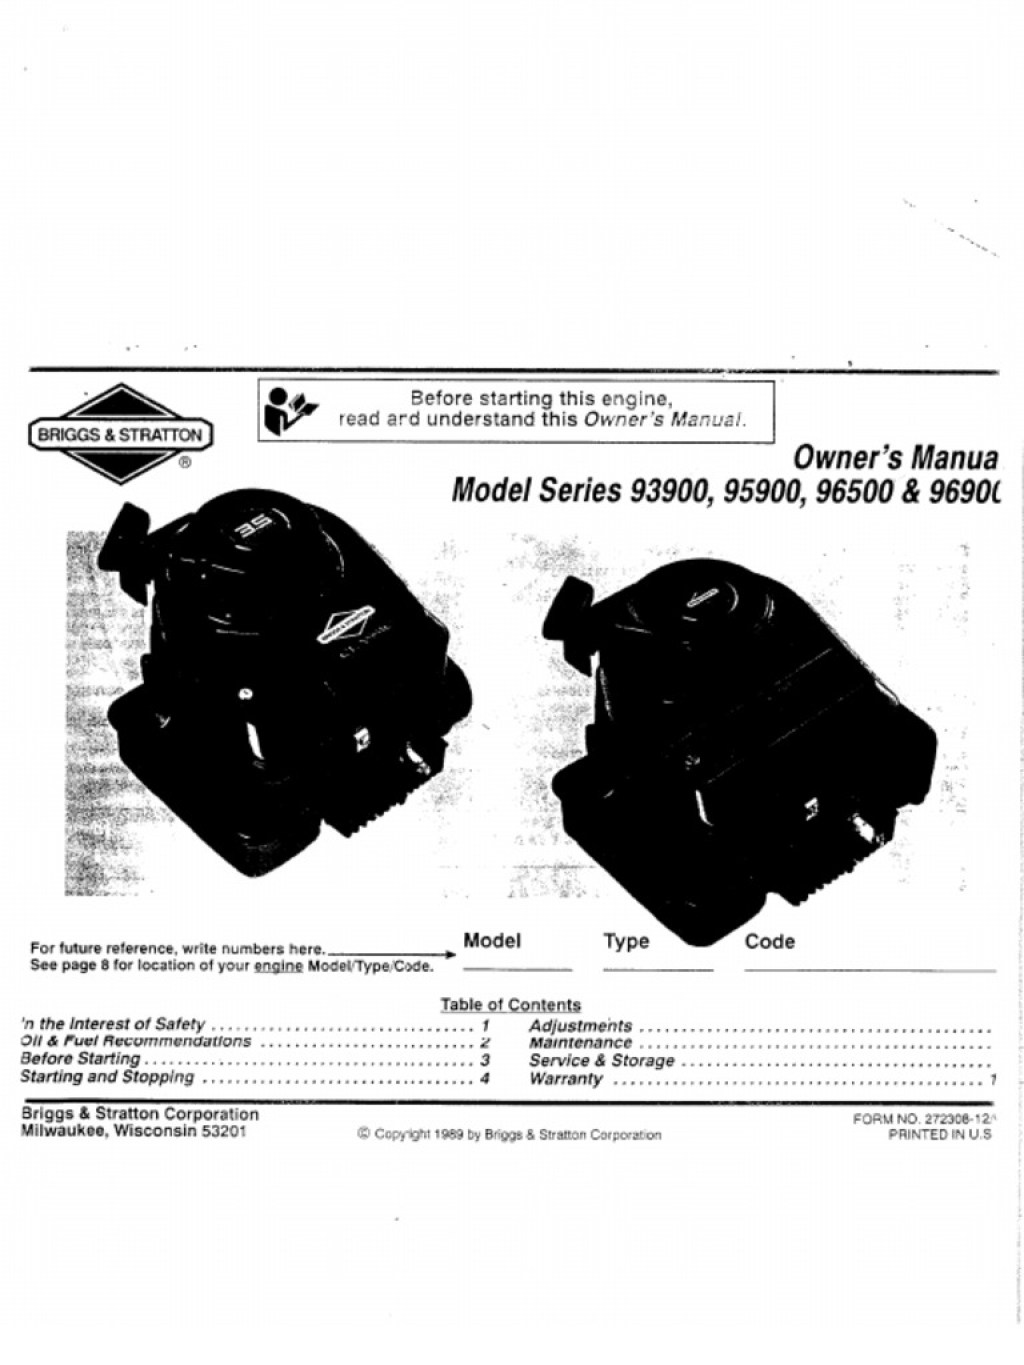 Picture of: Briggs & Stratton Sprint  User Manual  PDF  Business